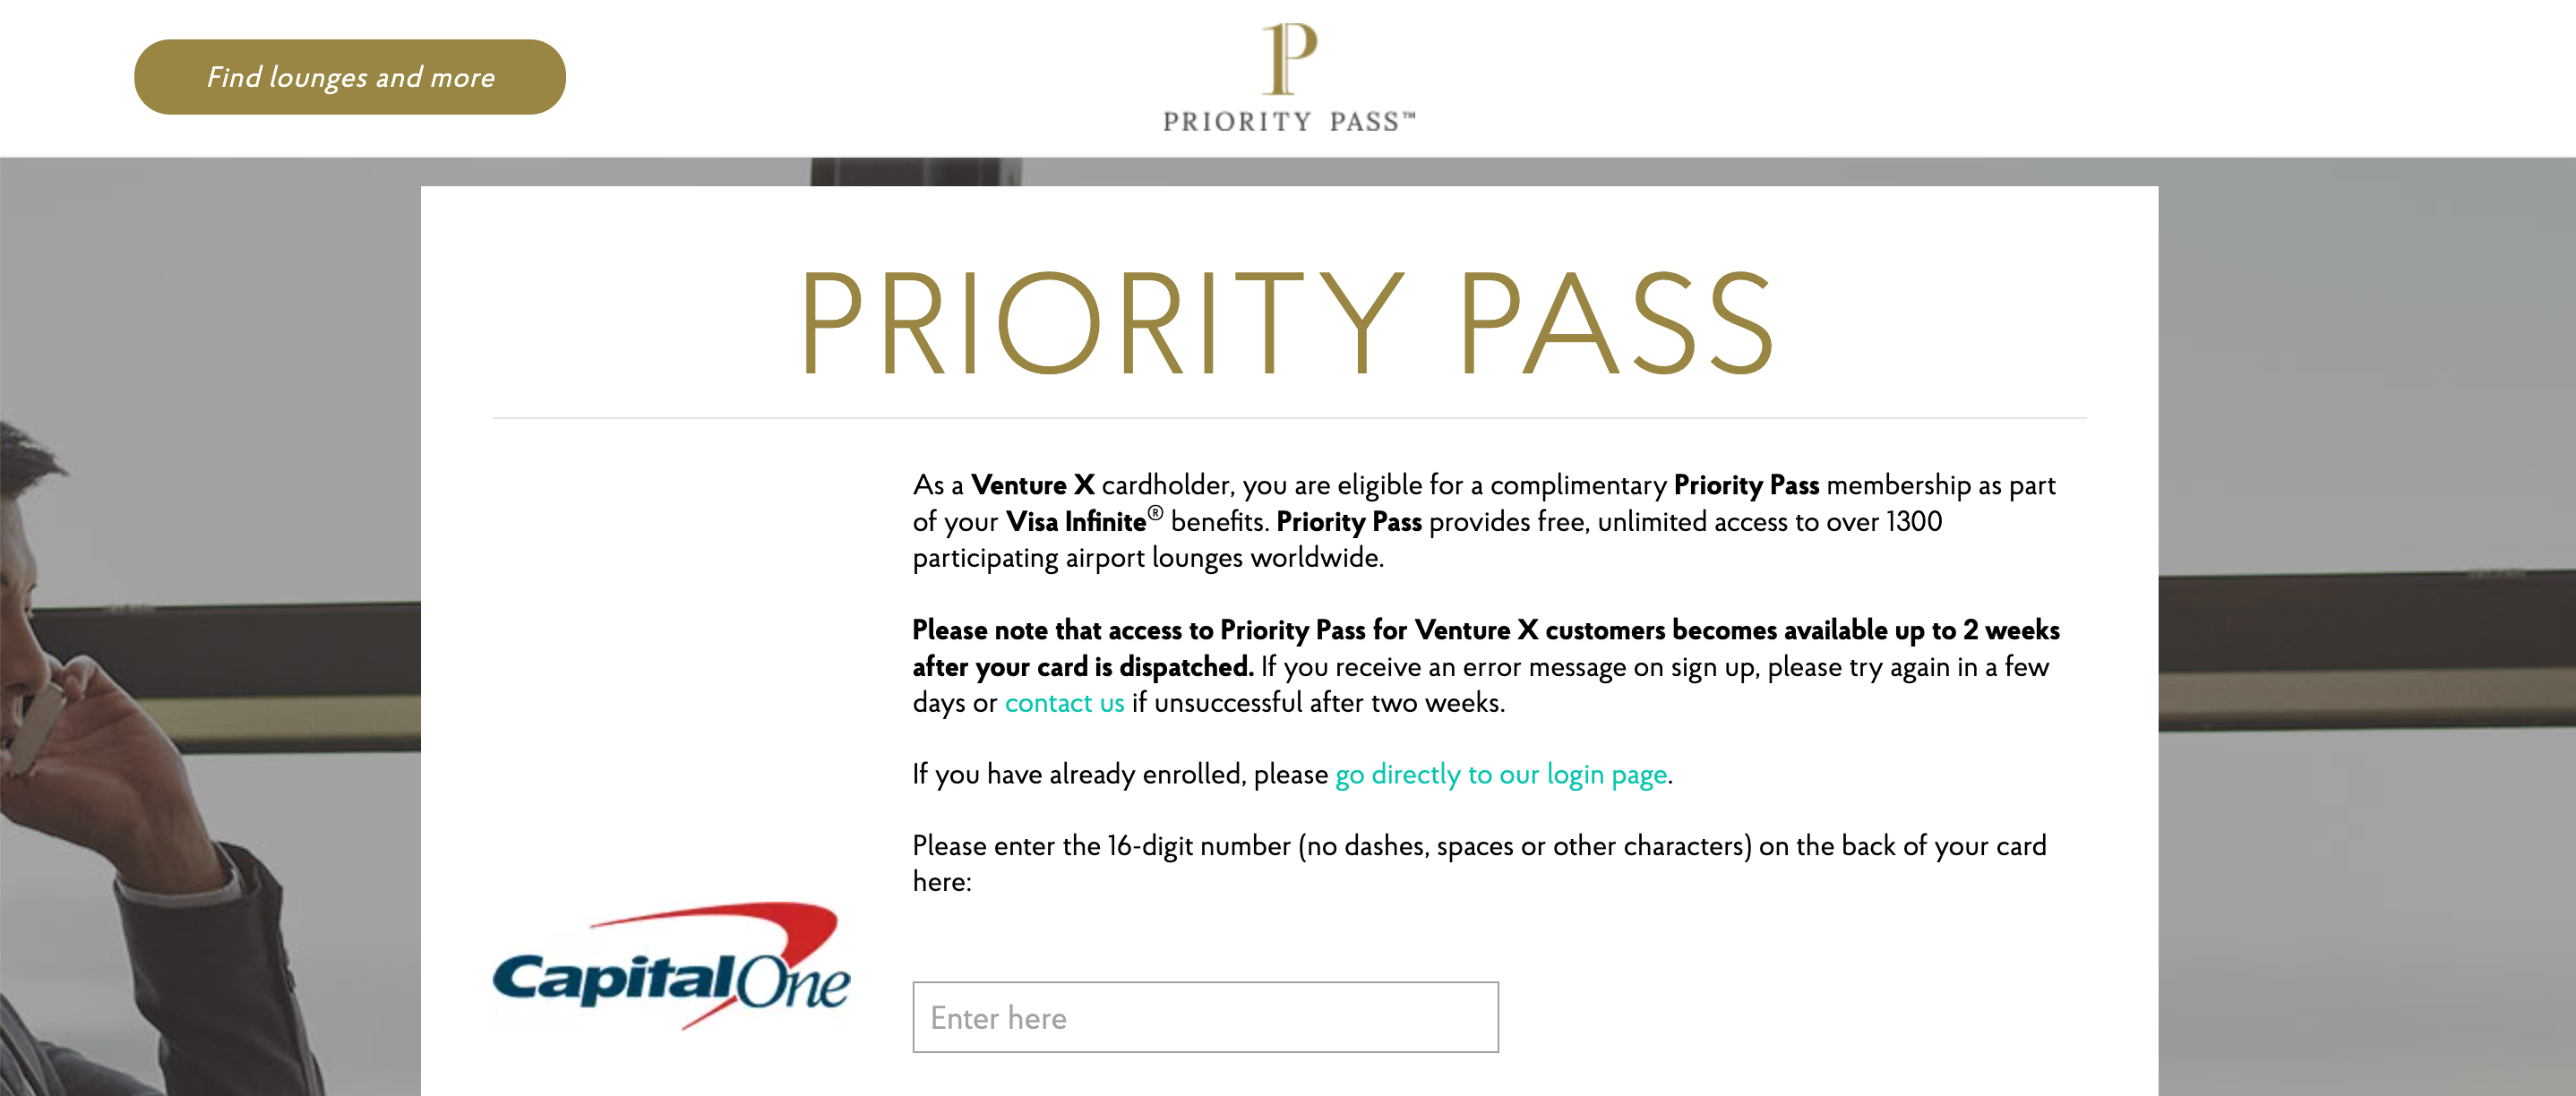 A screen shot of the Priority Pass enrollment page for Capital One Venture X cardholders